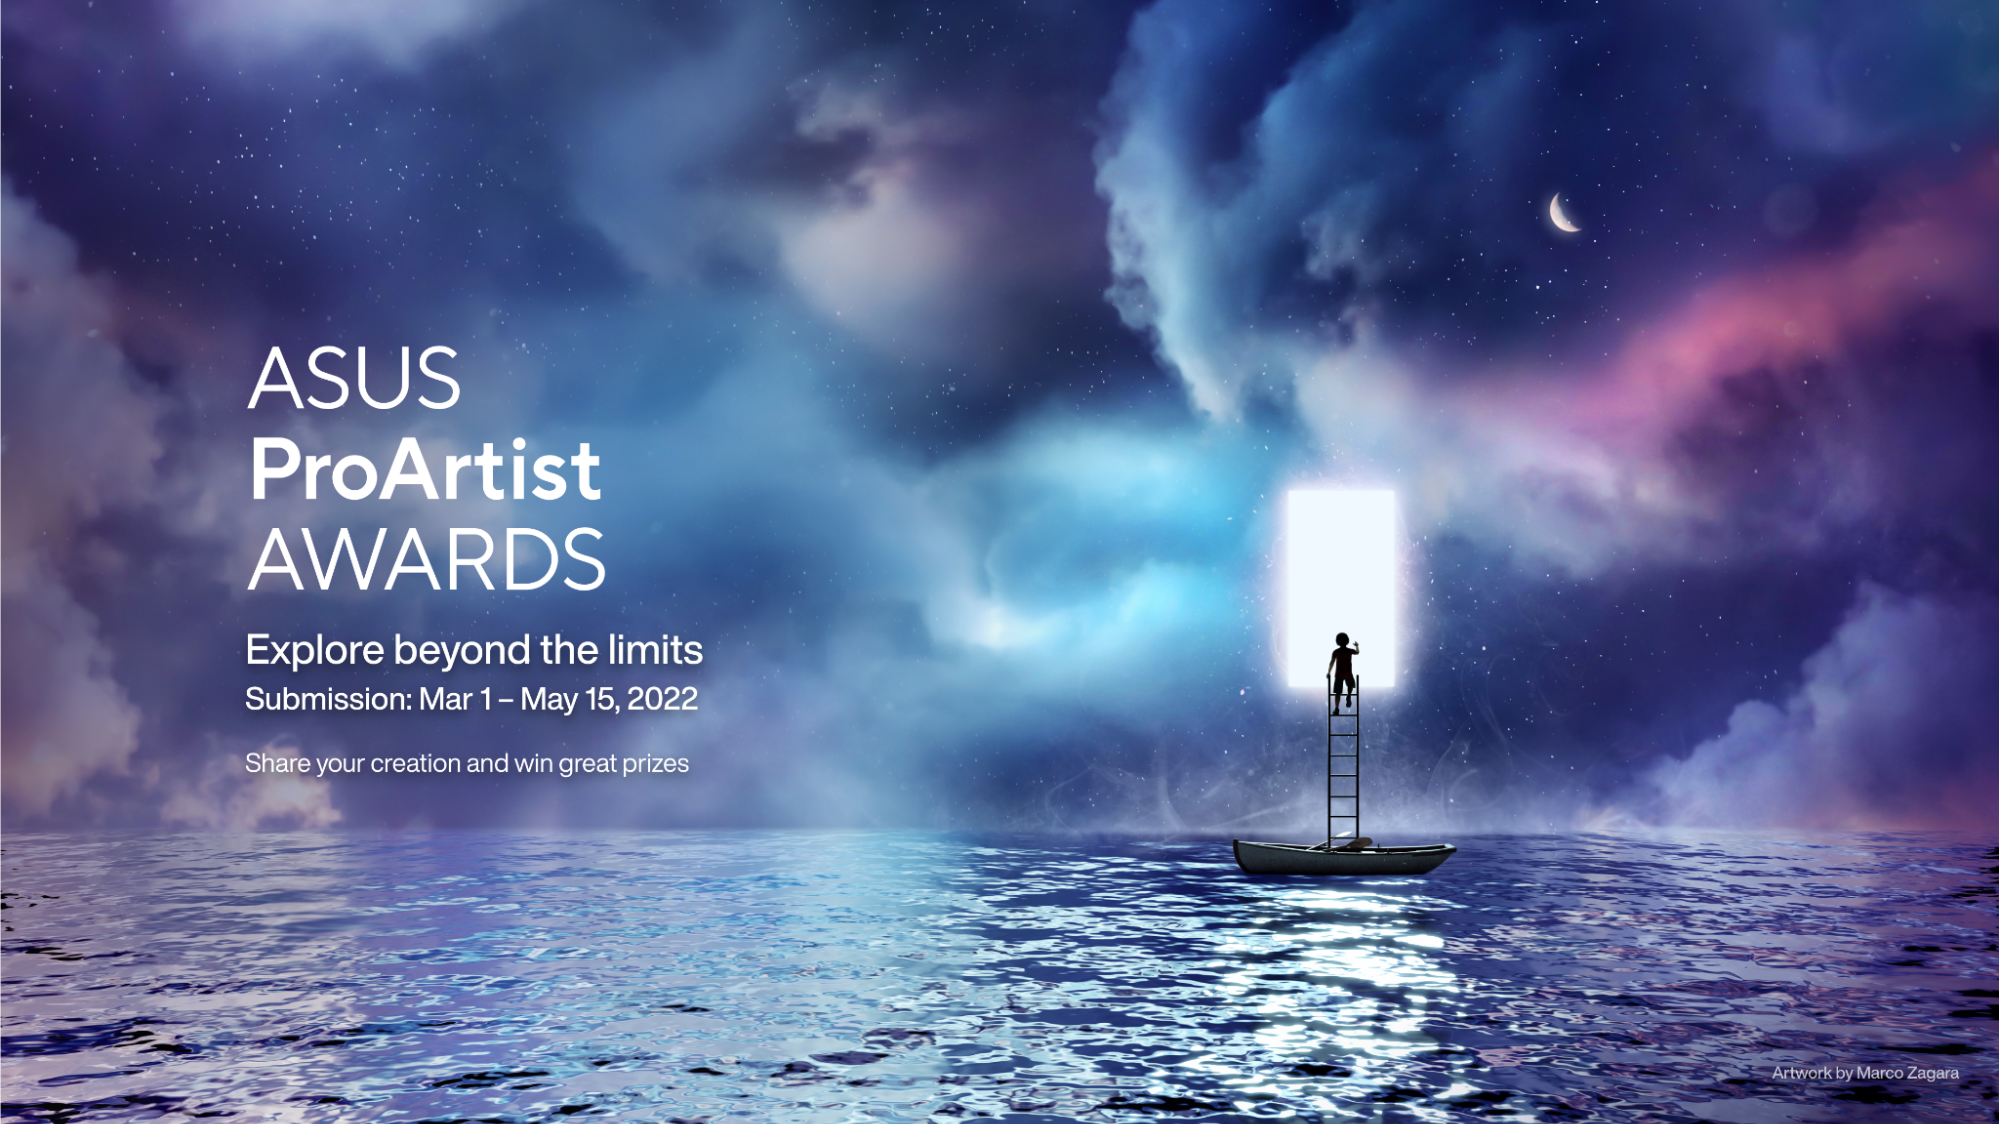 The ASUS ProArtist Awards 2022 are open for submissions.